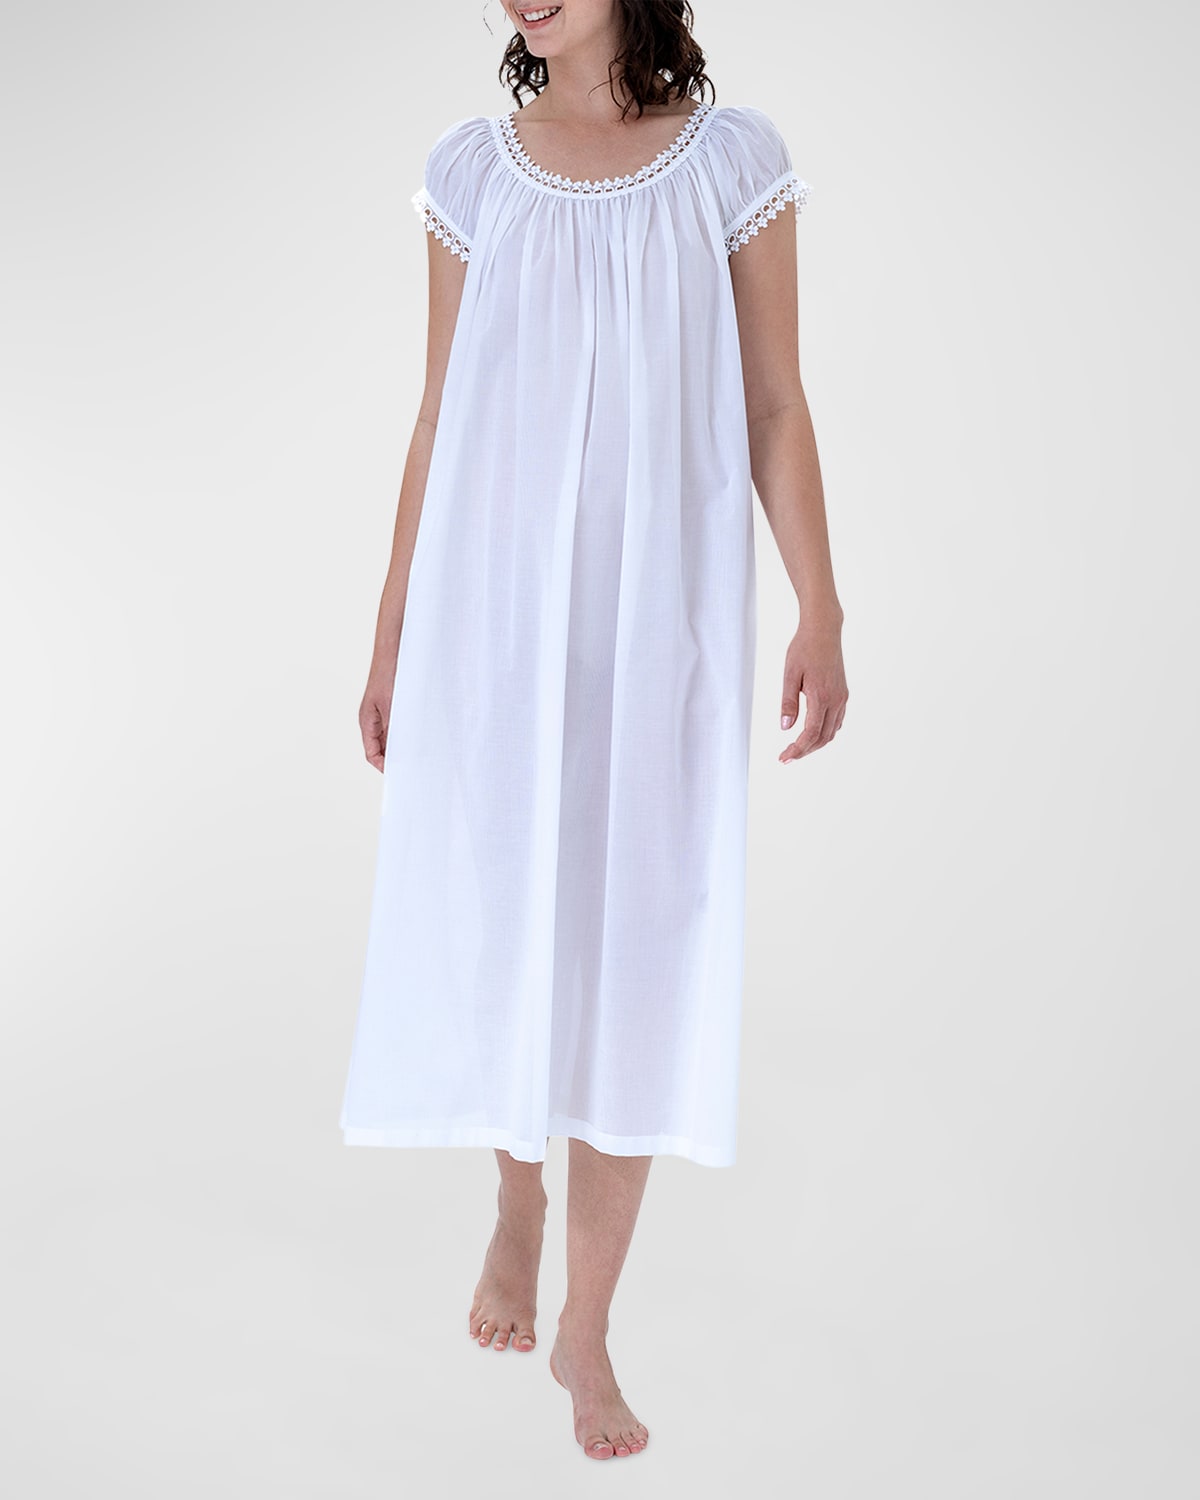 Monica-2 Ruched Lace-Trim Cotton Nightgown